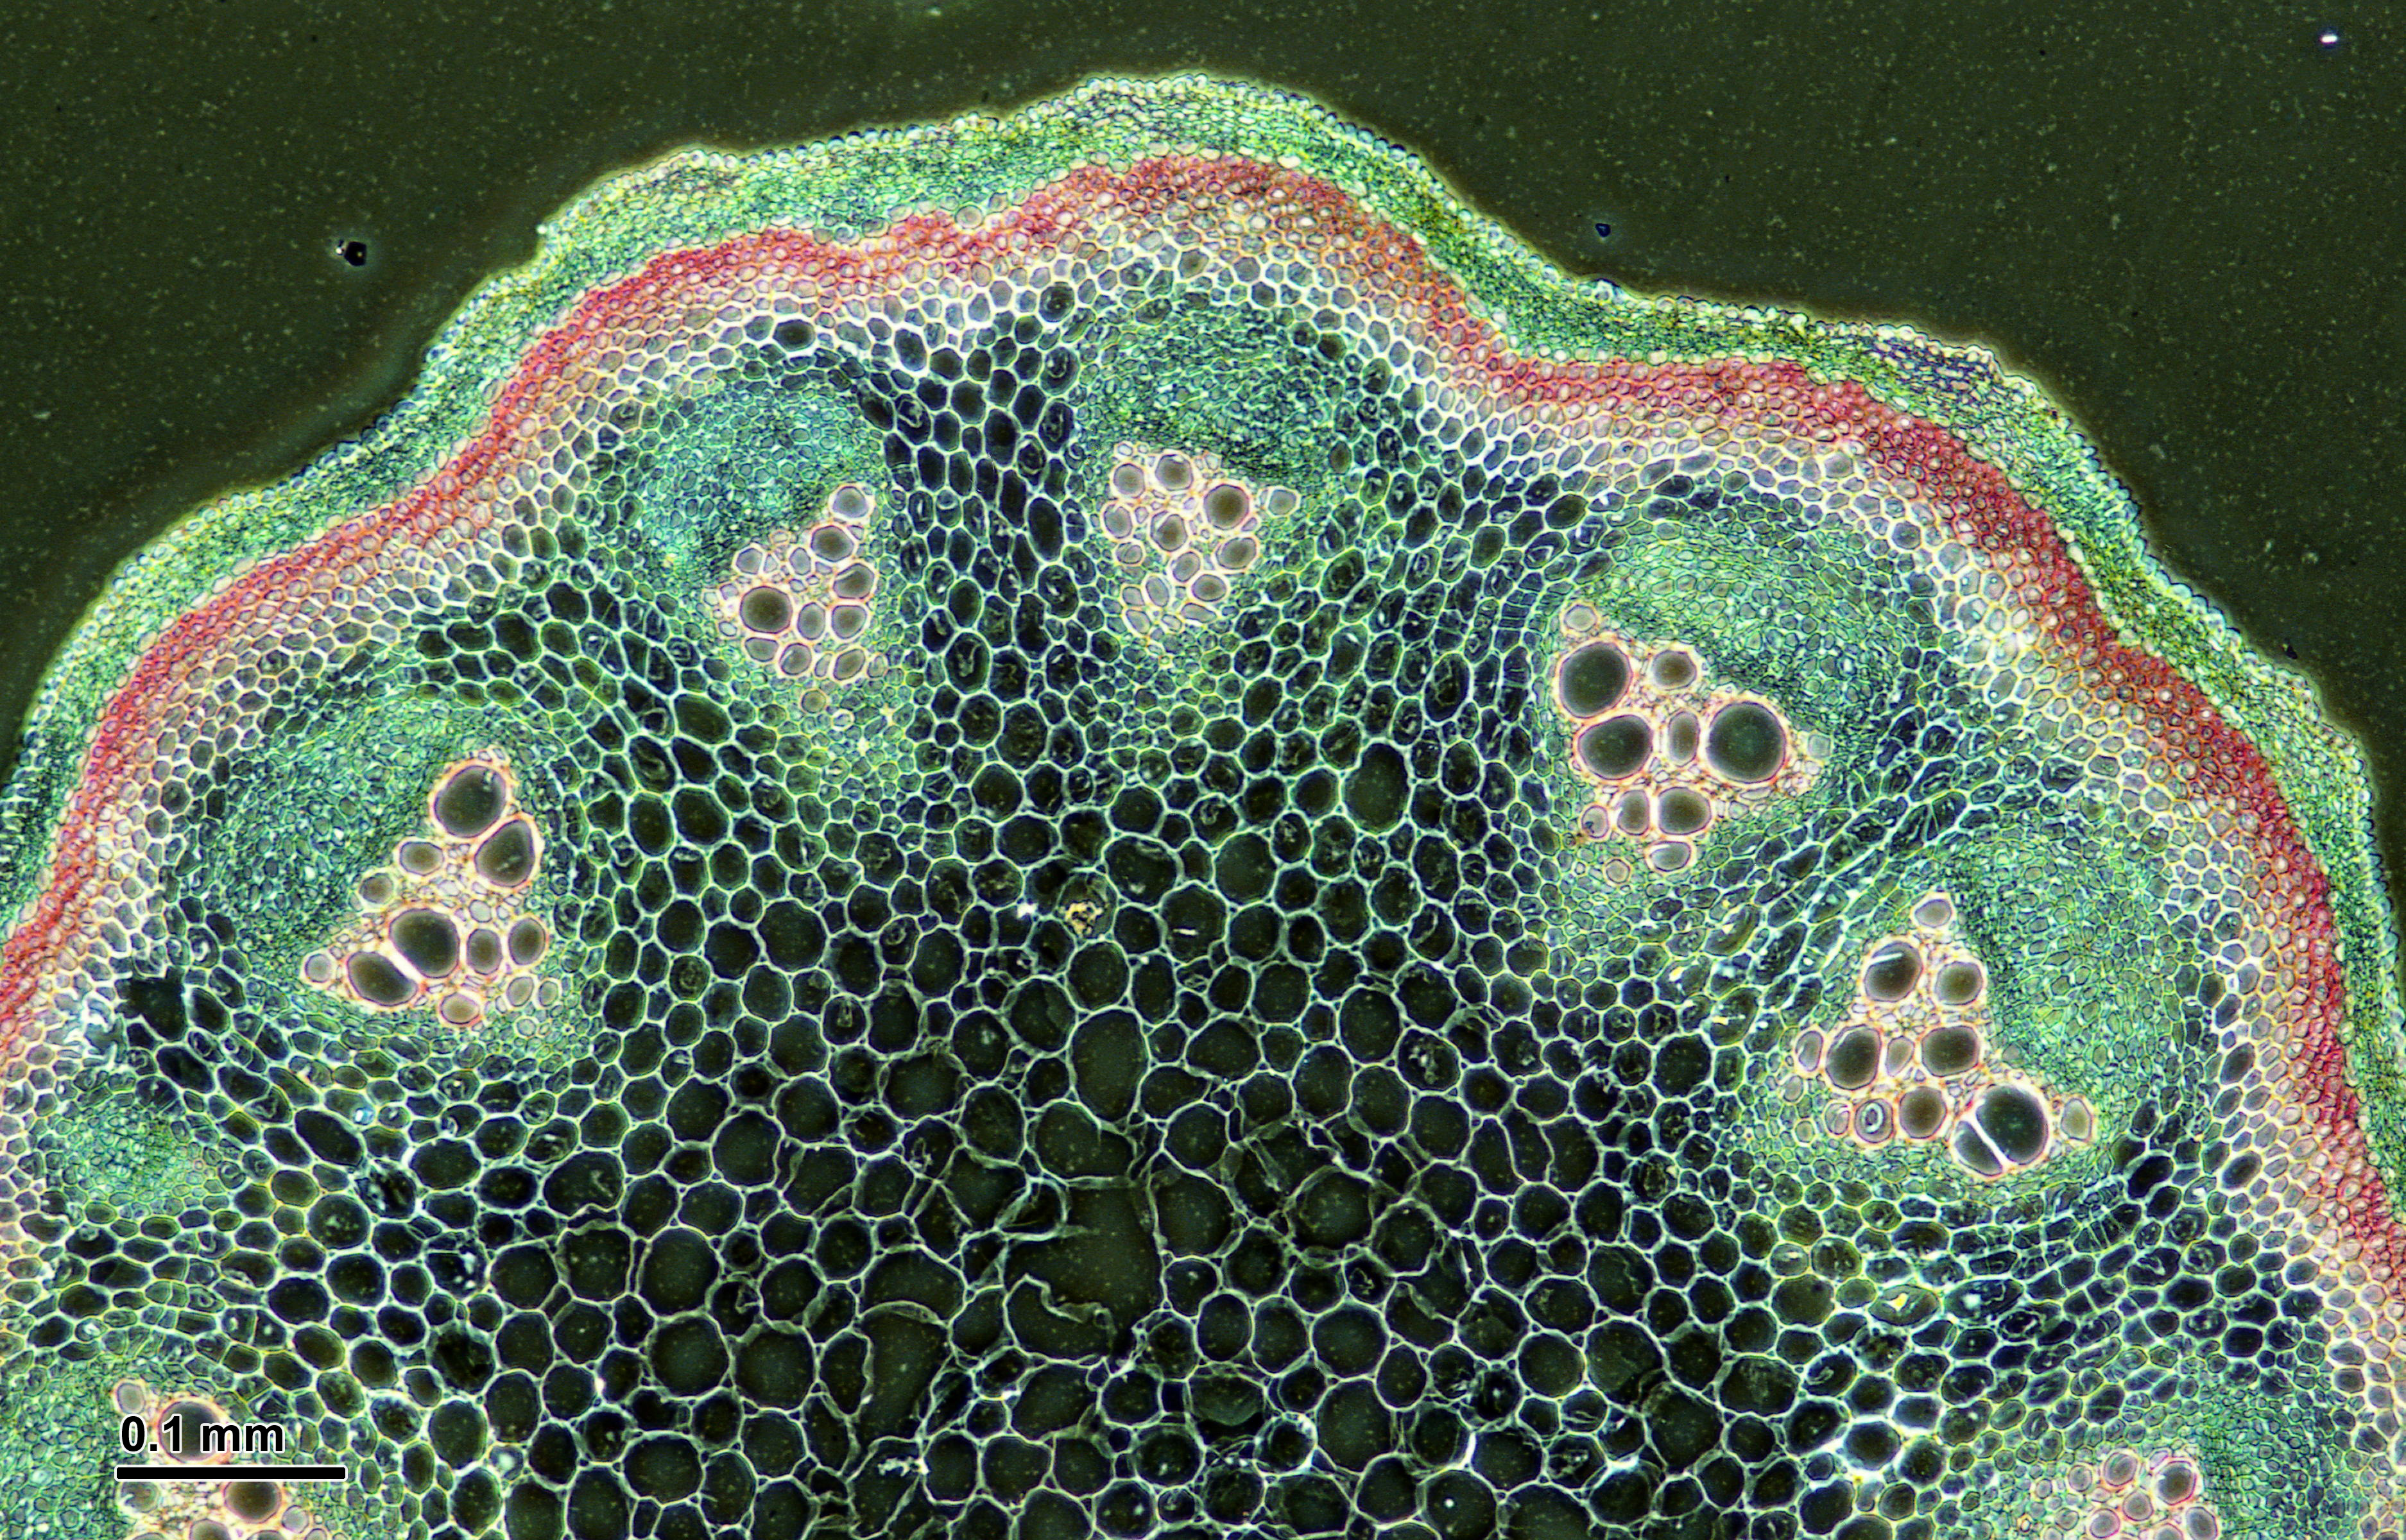 Plant stem cells: cross section of a stem